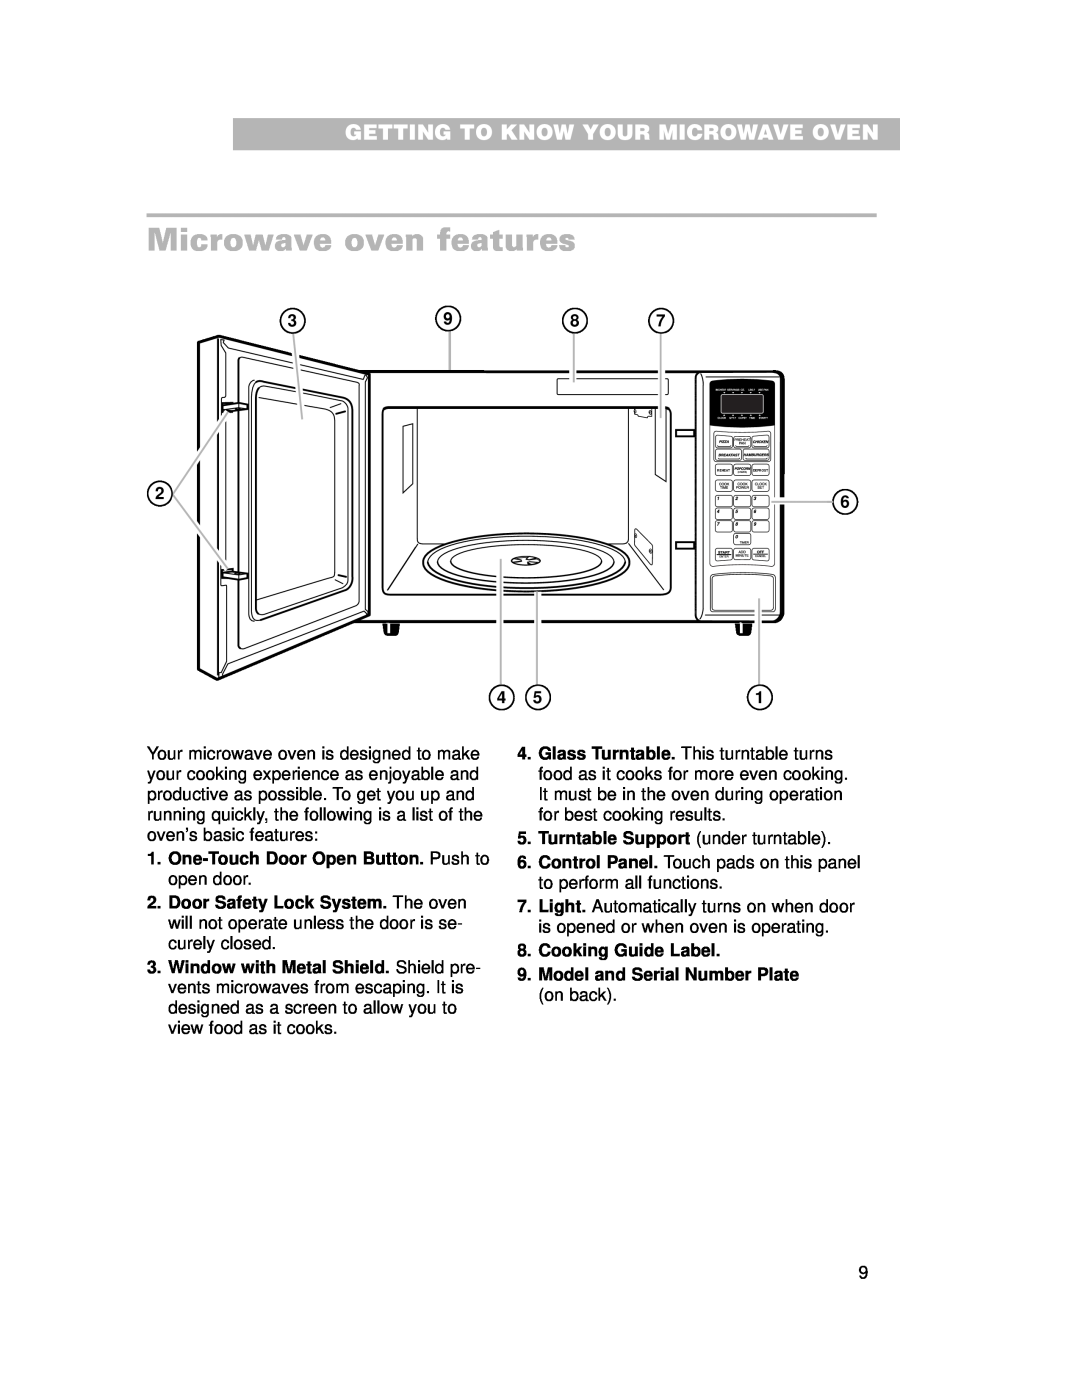 Whirlpool CMT102SG installation instructions Microwave oven features, Getting To Know Your Microwave Oven 